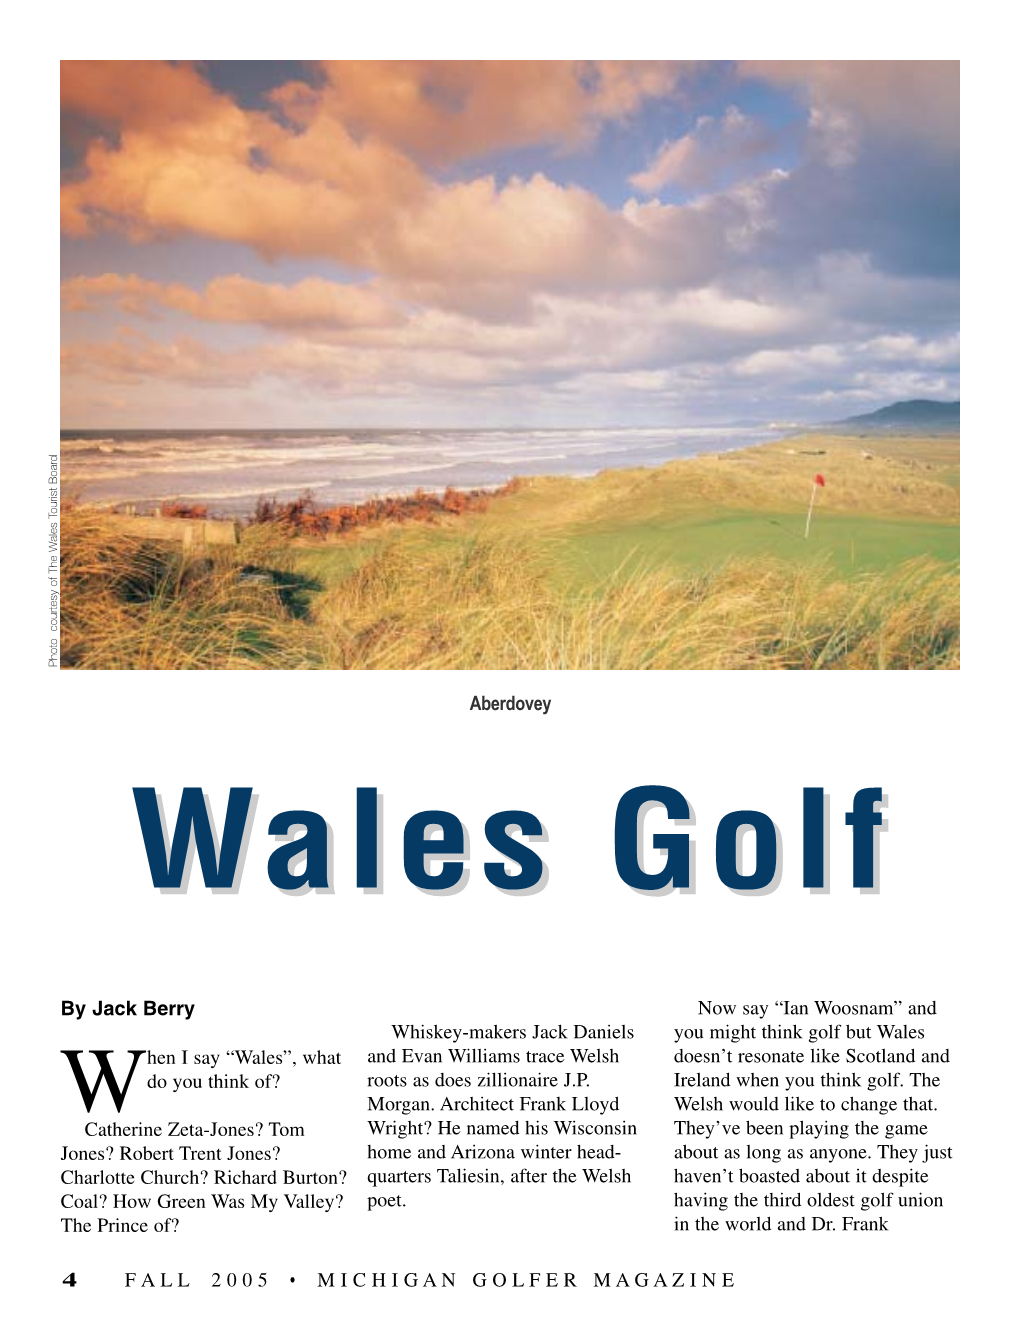 4 Wales Golf, by Jack Berry